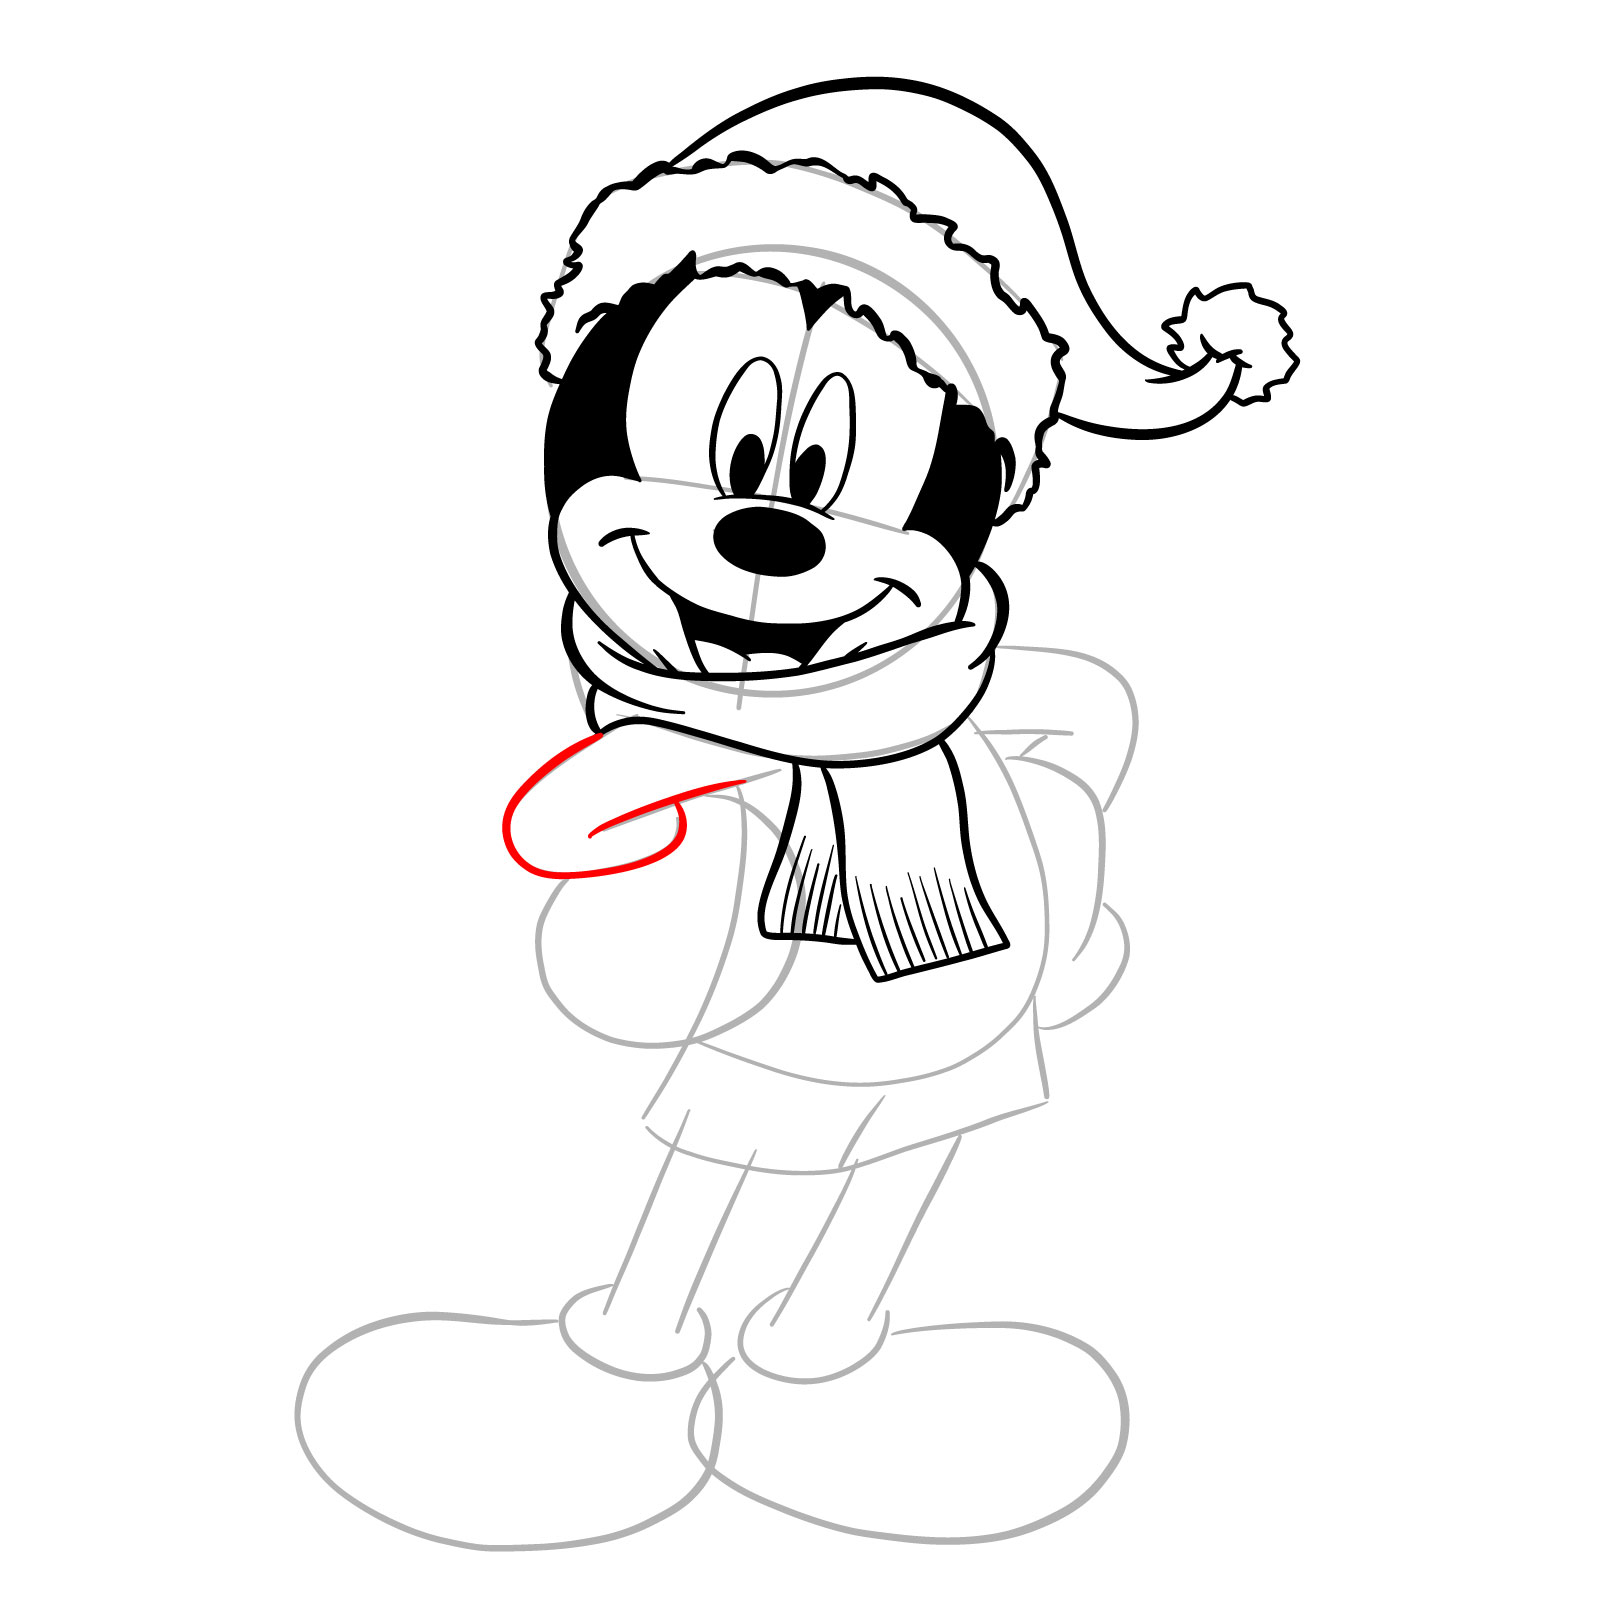 How to draw Santa Mickey Mouse - step 20